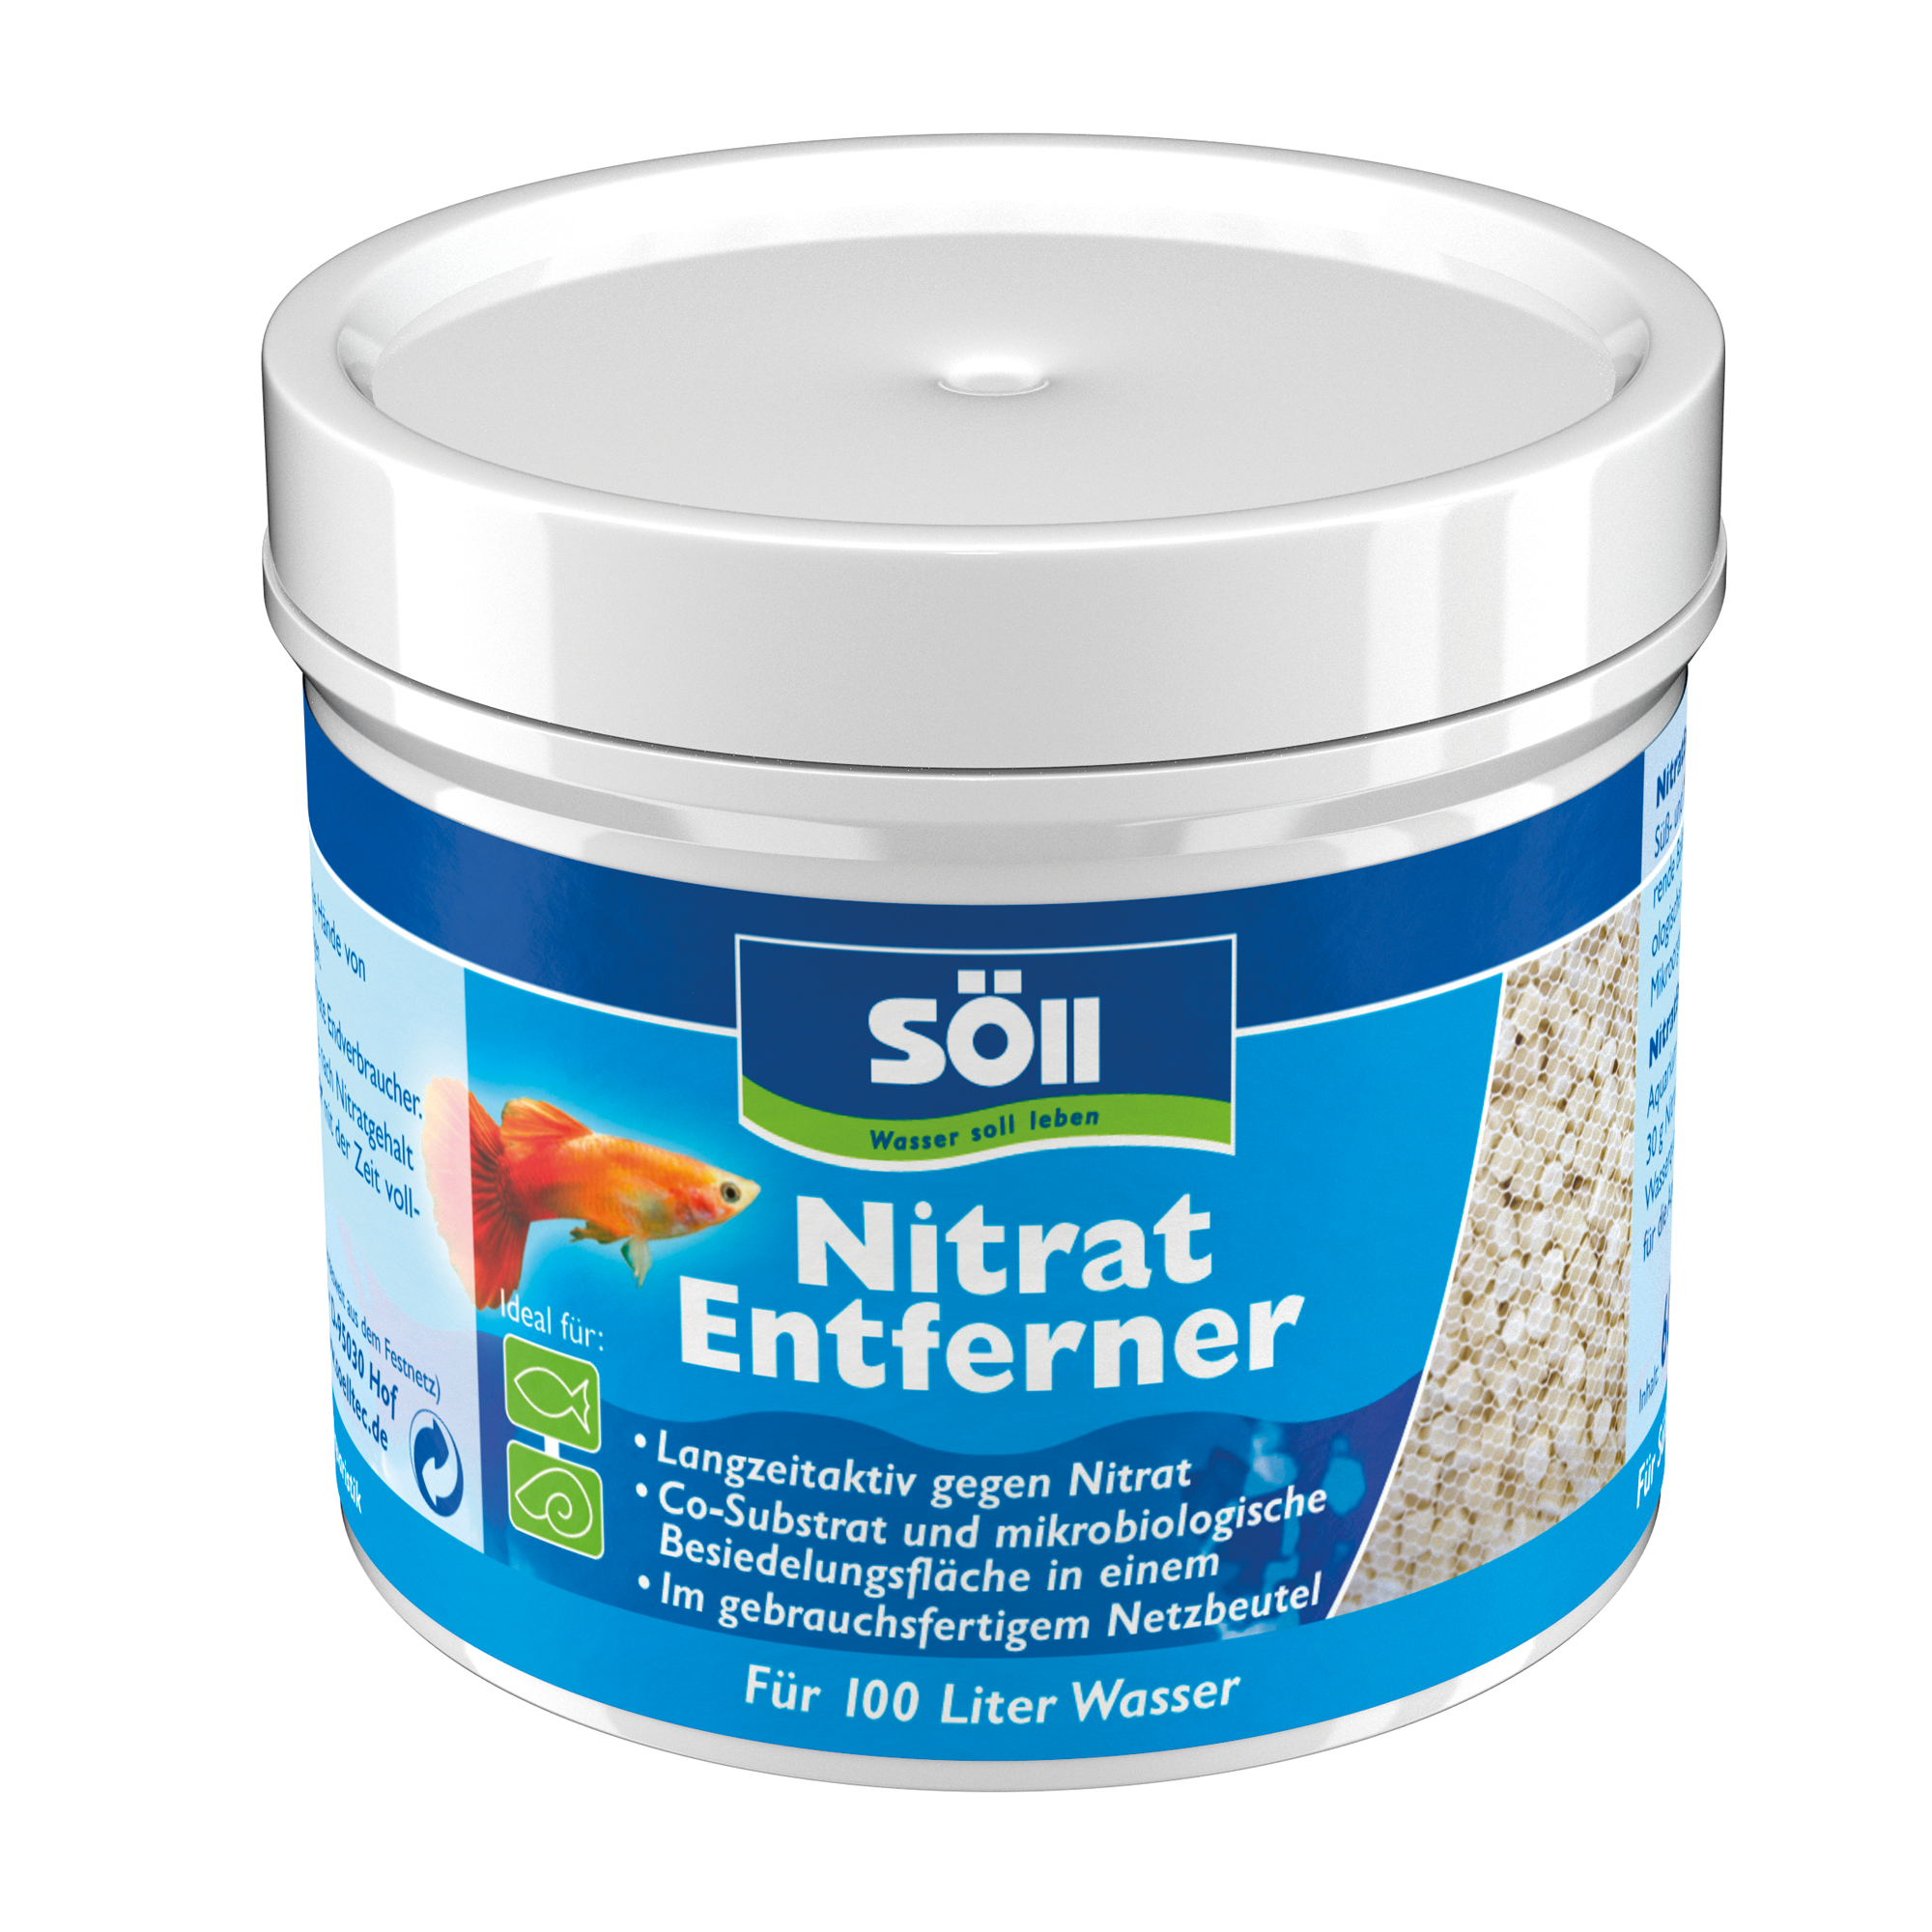 NitratEntferner 60g + product picture